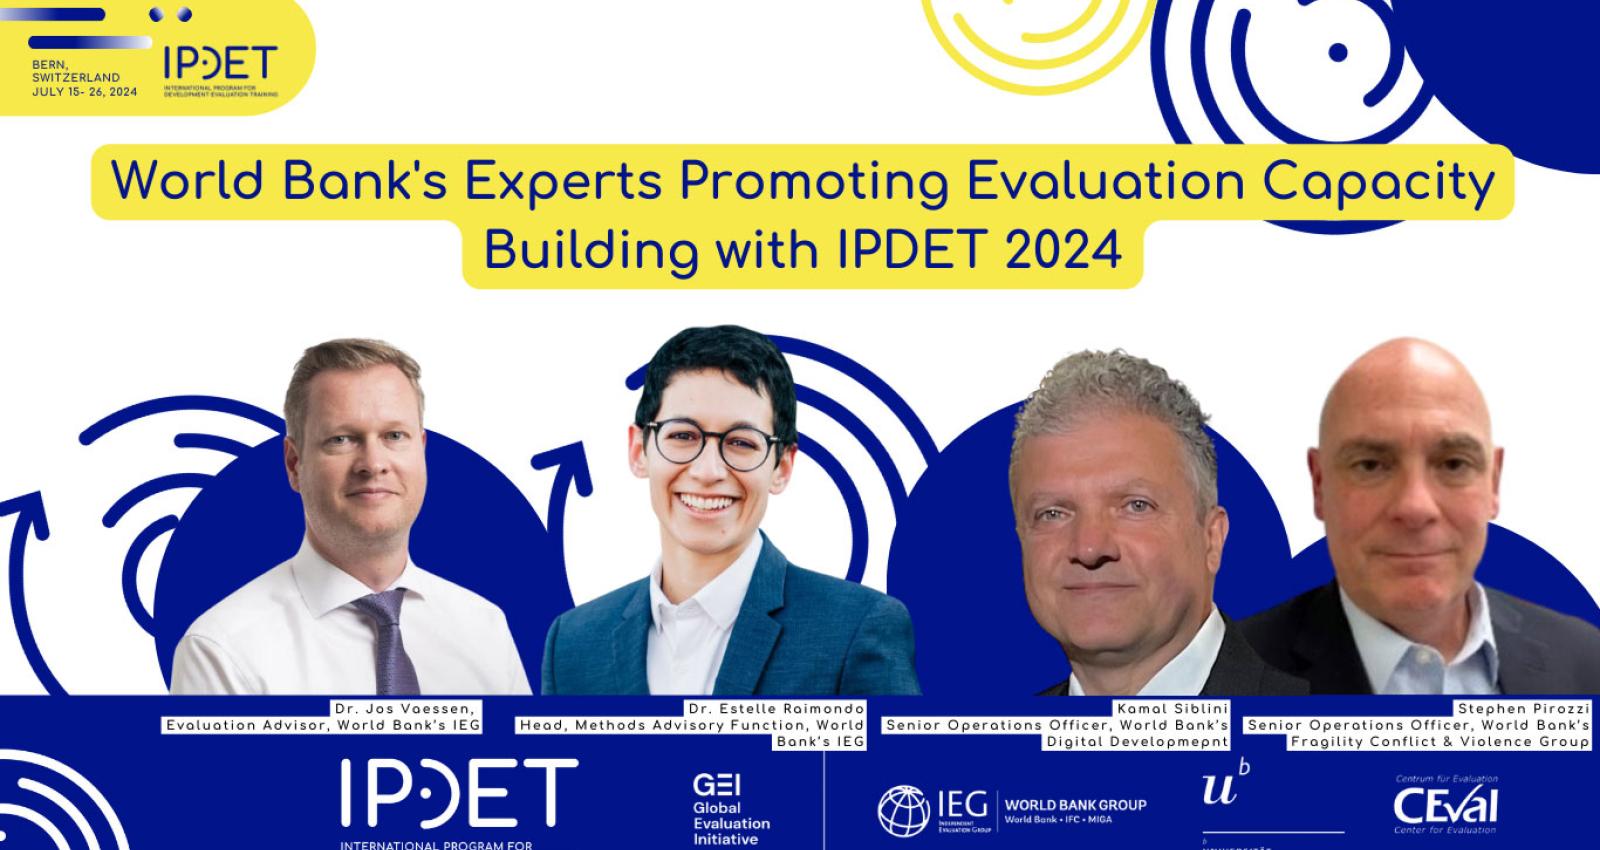 World Bank's Experts Promoting Evaluation Capacity Building with IPDET 2024